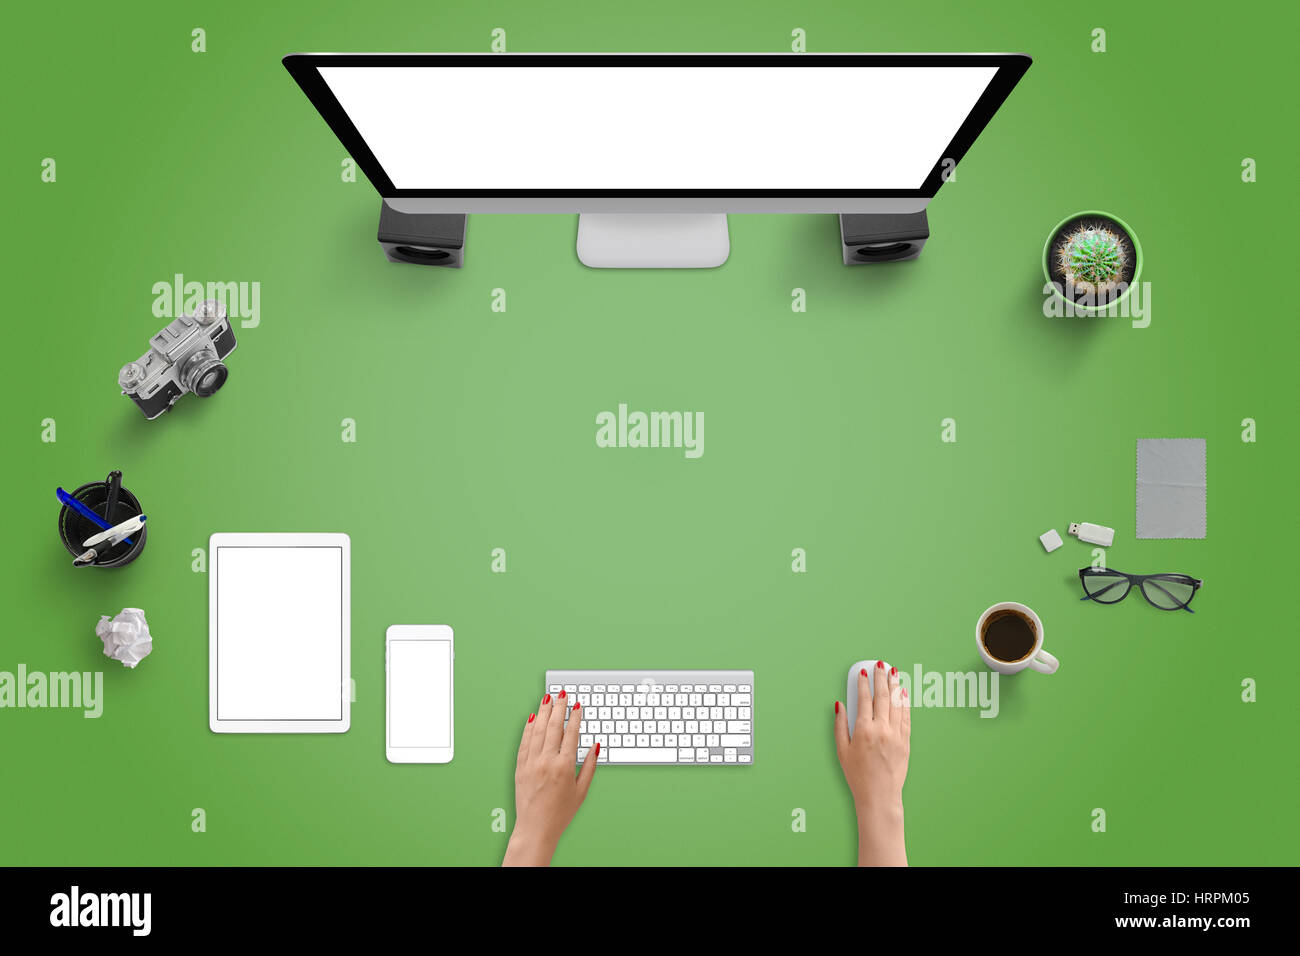 Top view of studio desk with modern devices. Computer display, tablet and mobile phone. Green desk with free space for text. Stock Photo